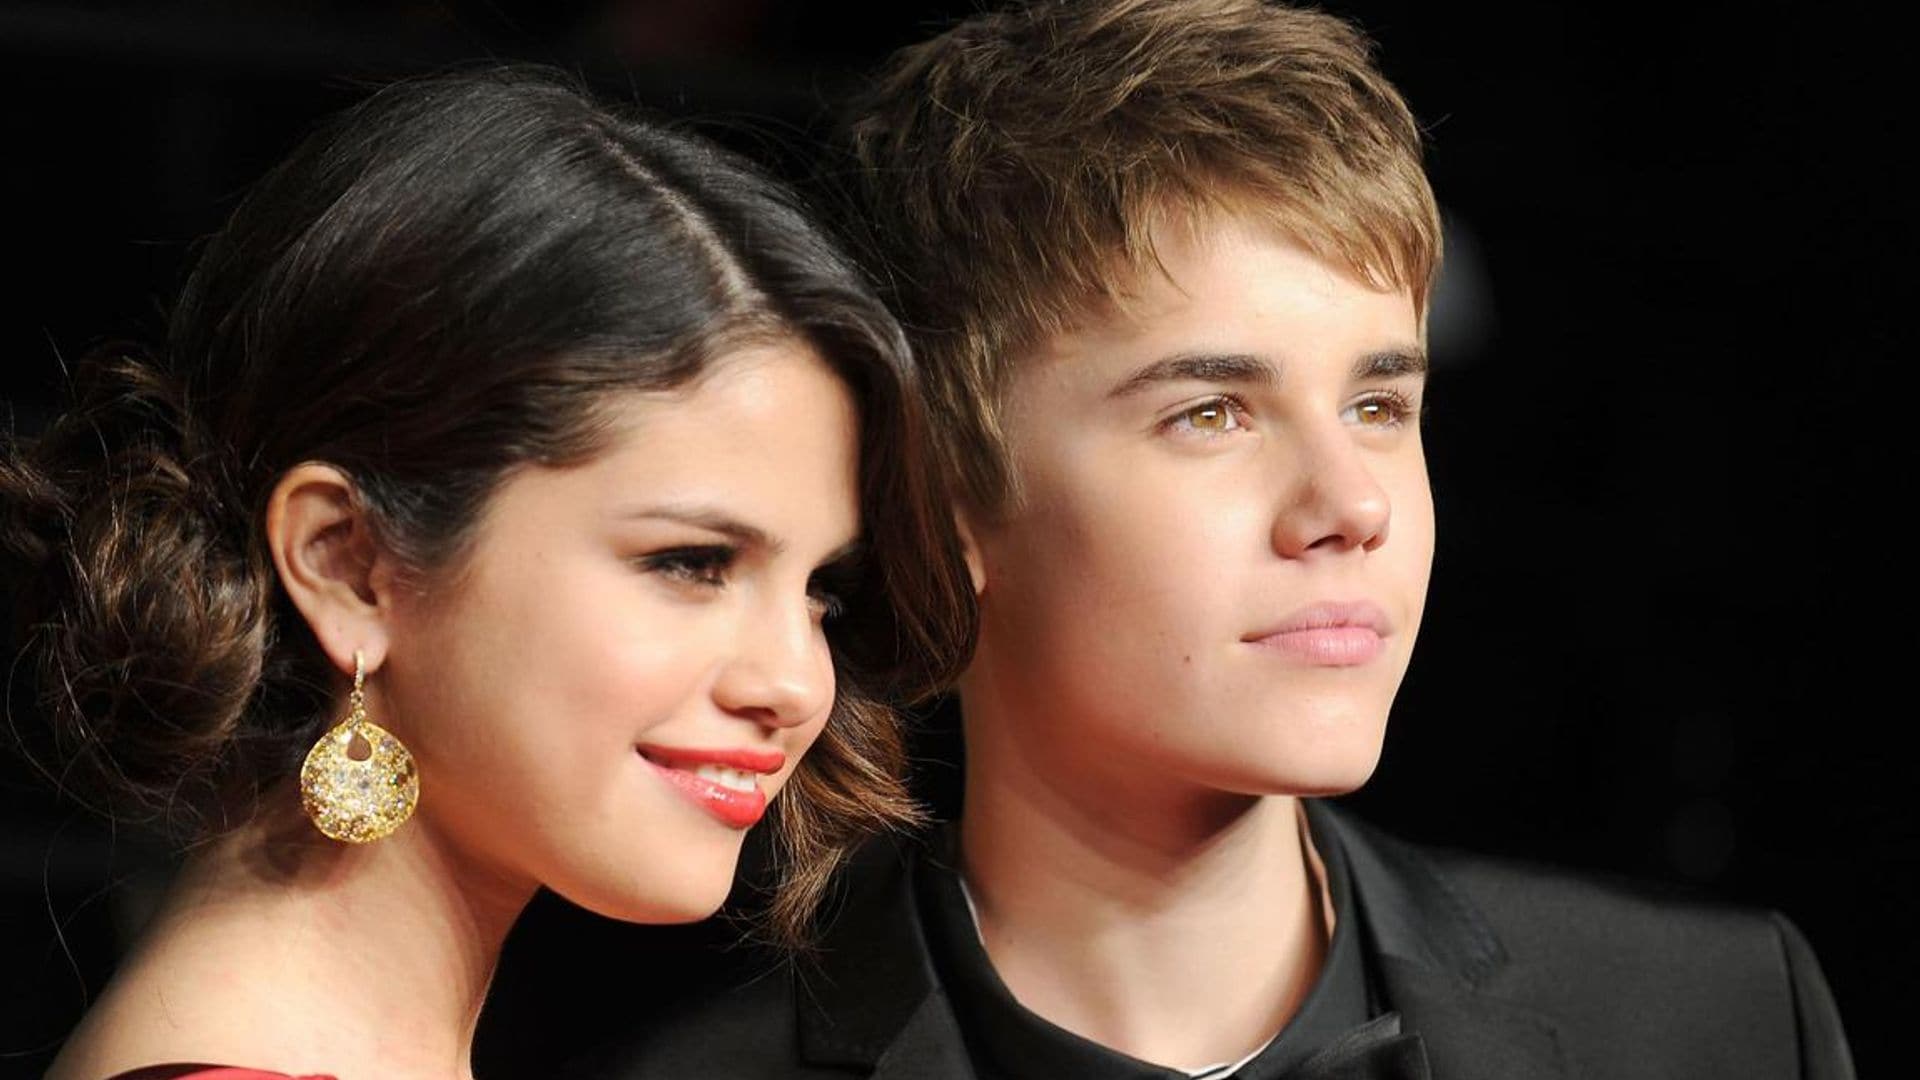 Every song that Selena Gomez and Justin Bieber have ever written about each other